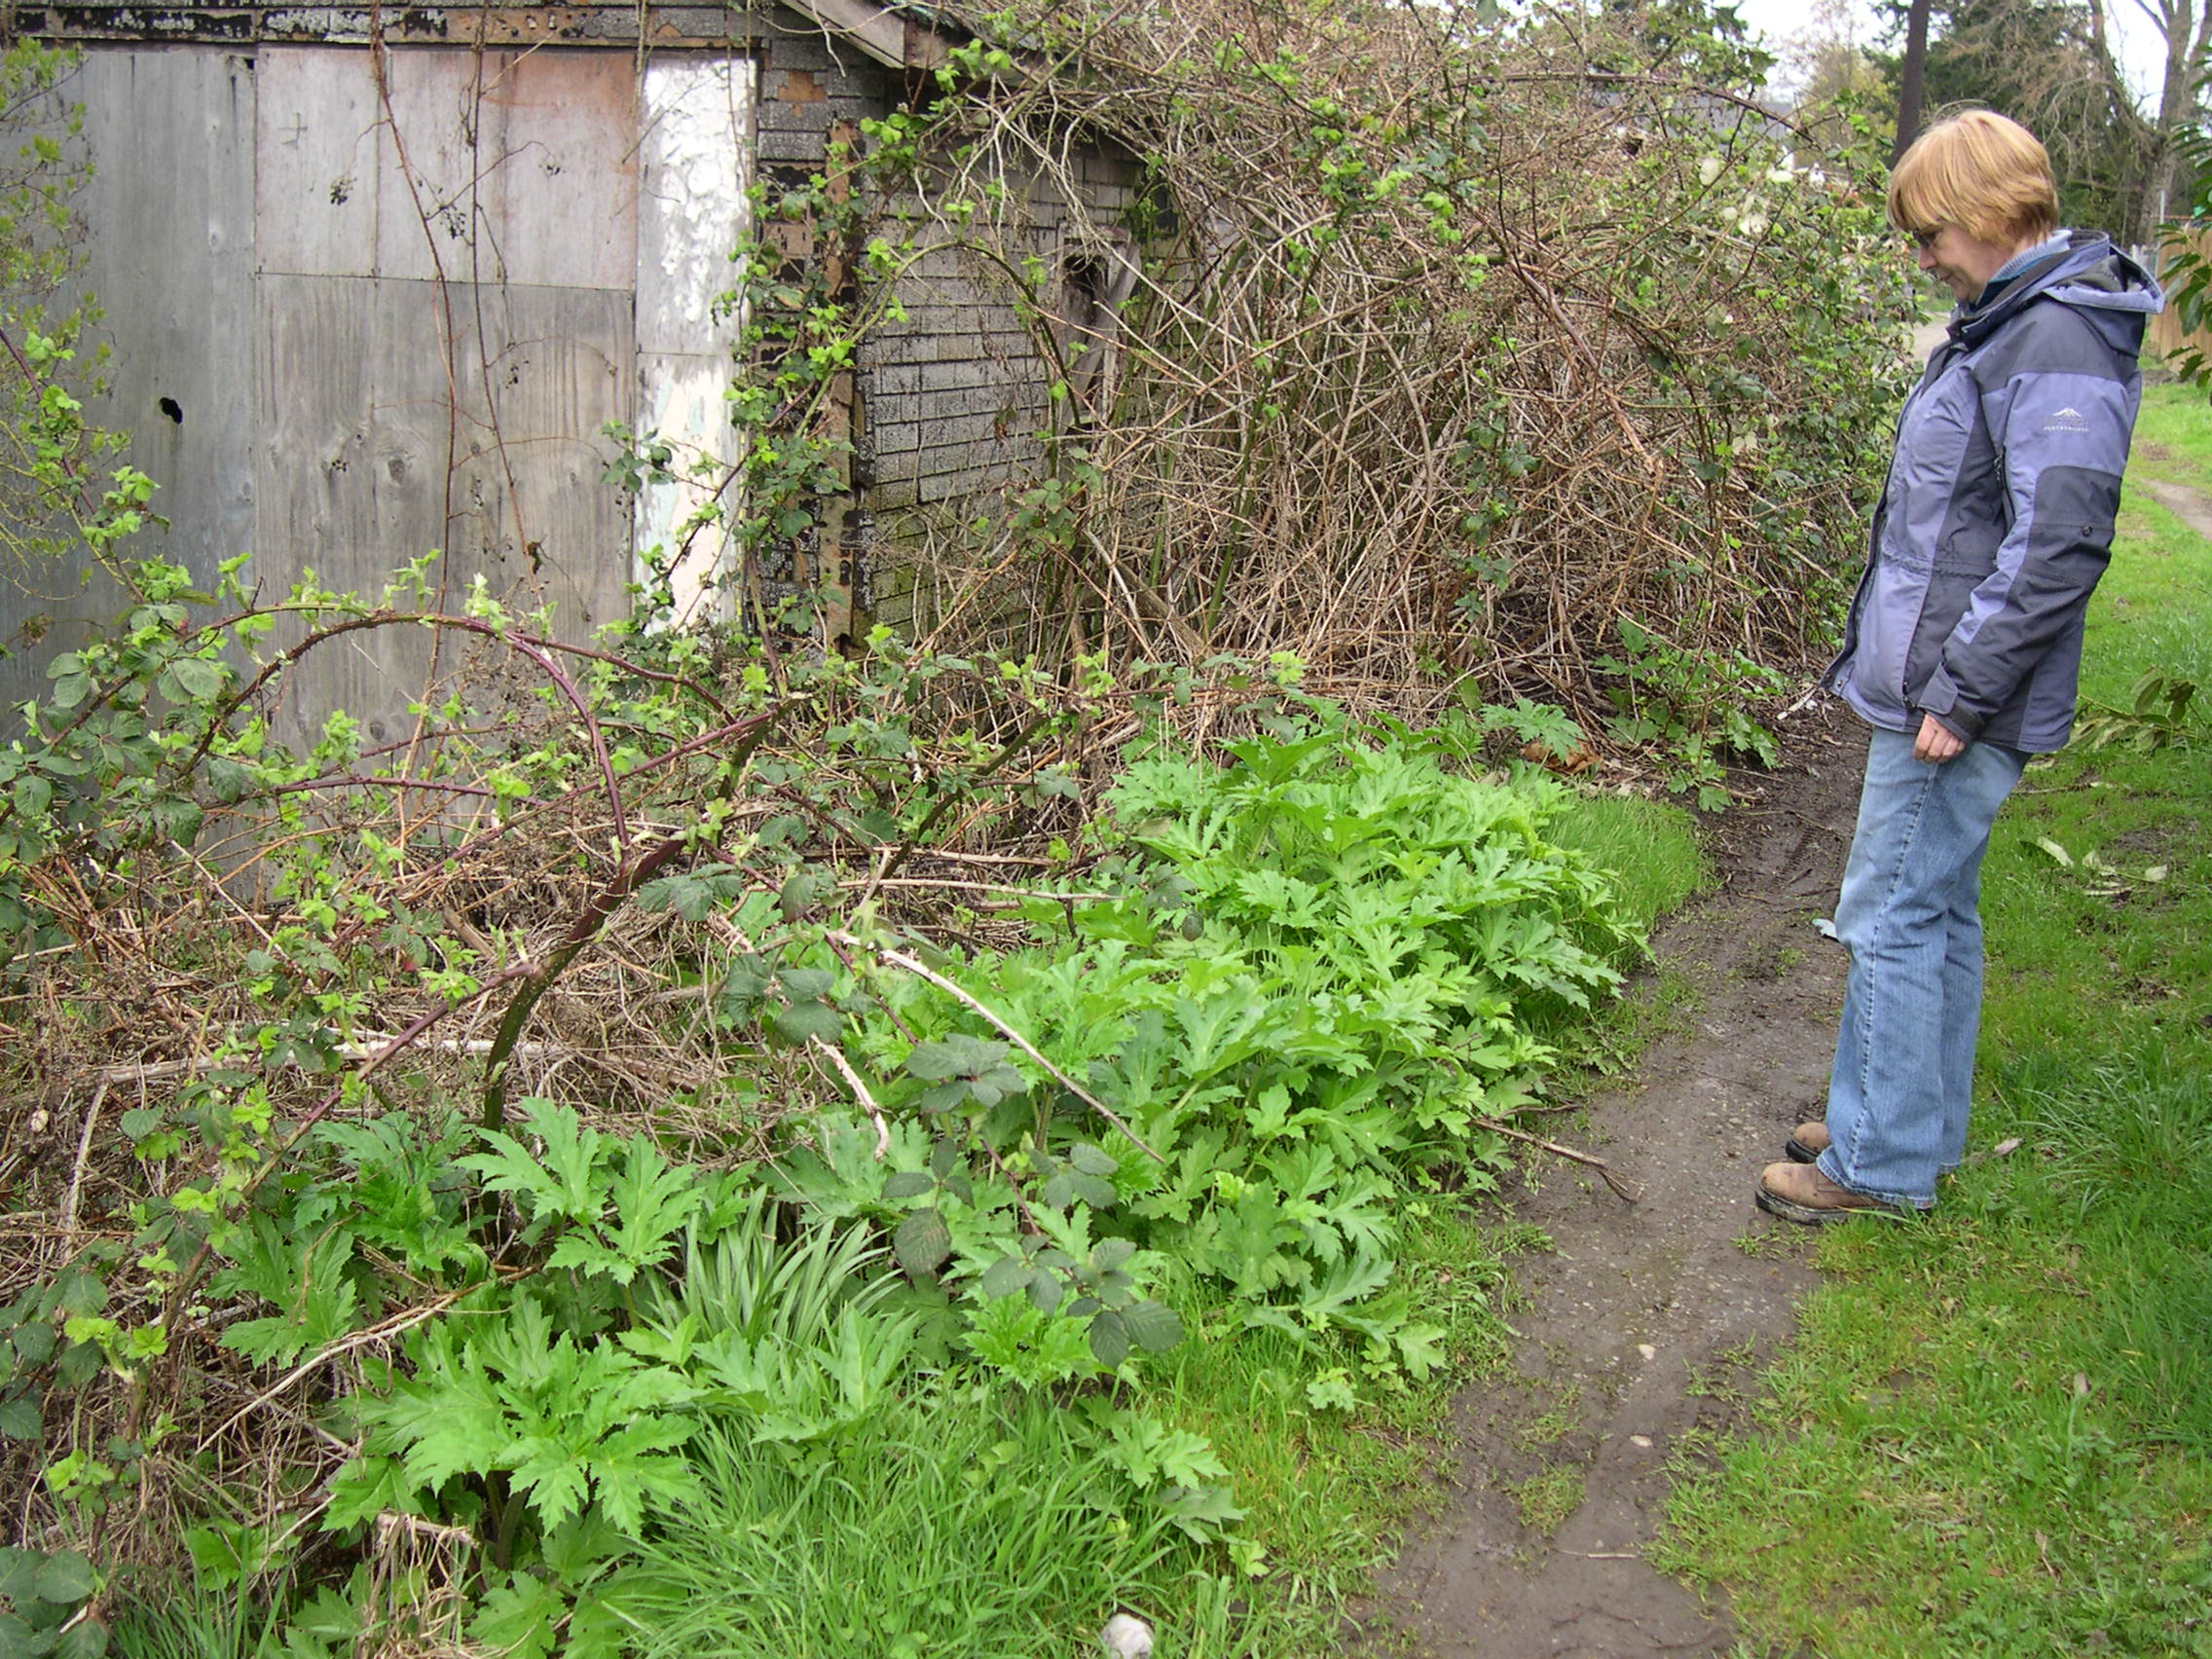 Giant hogweed early season plants in an alley